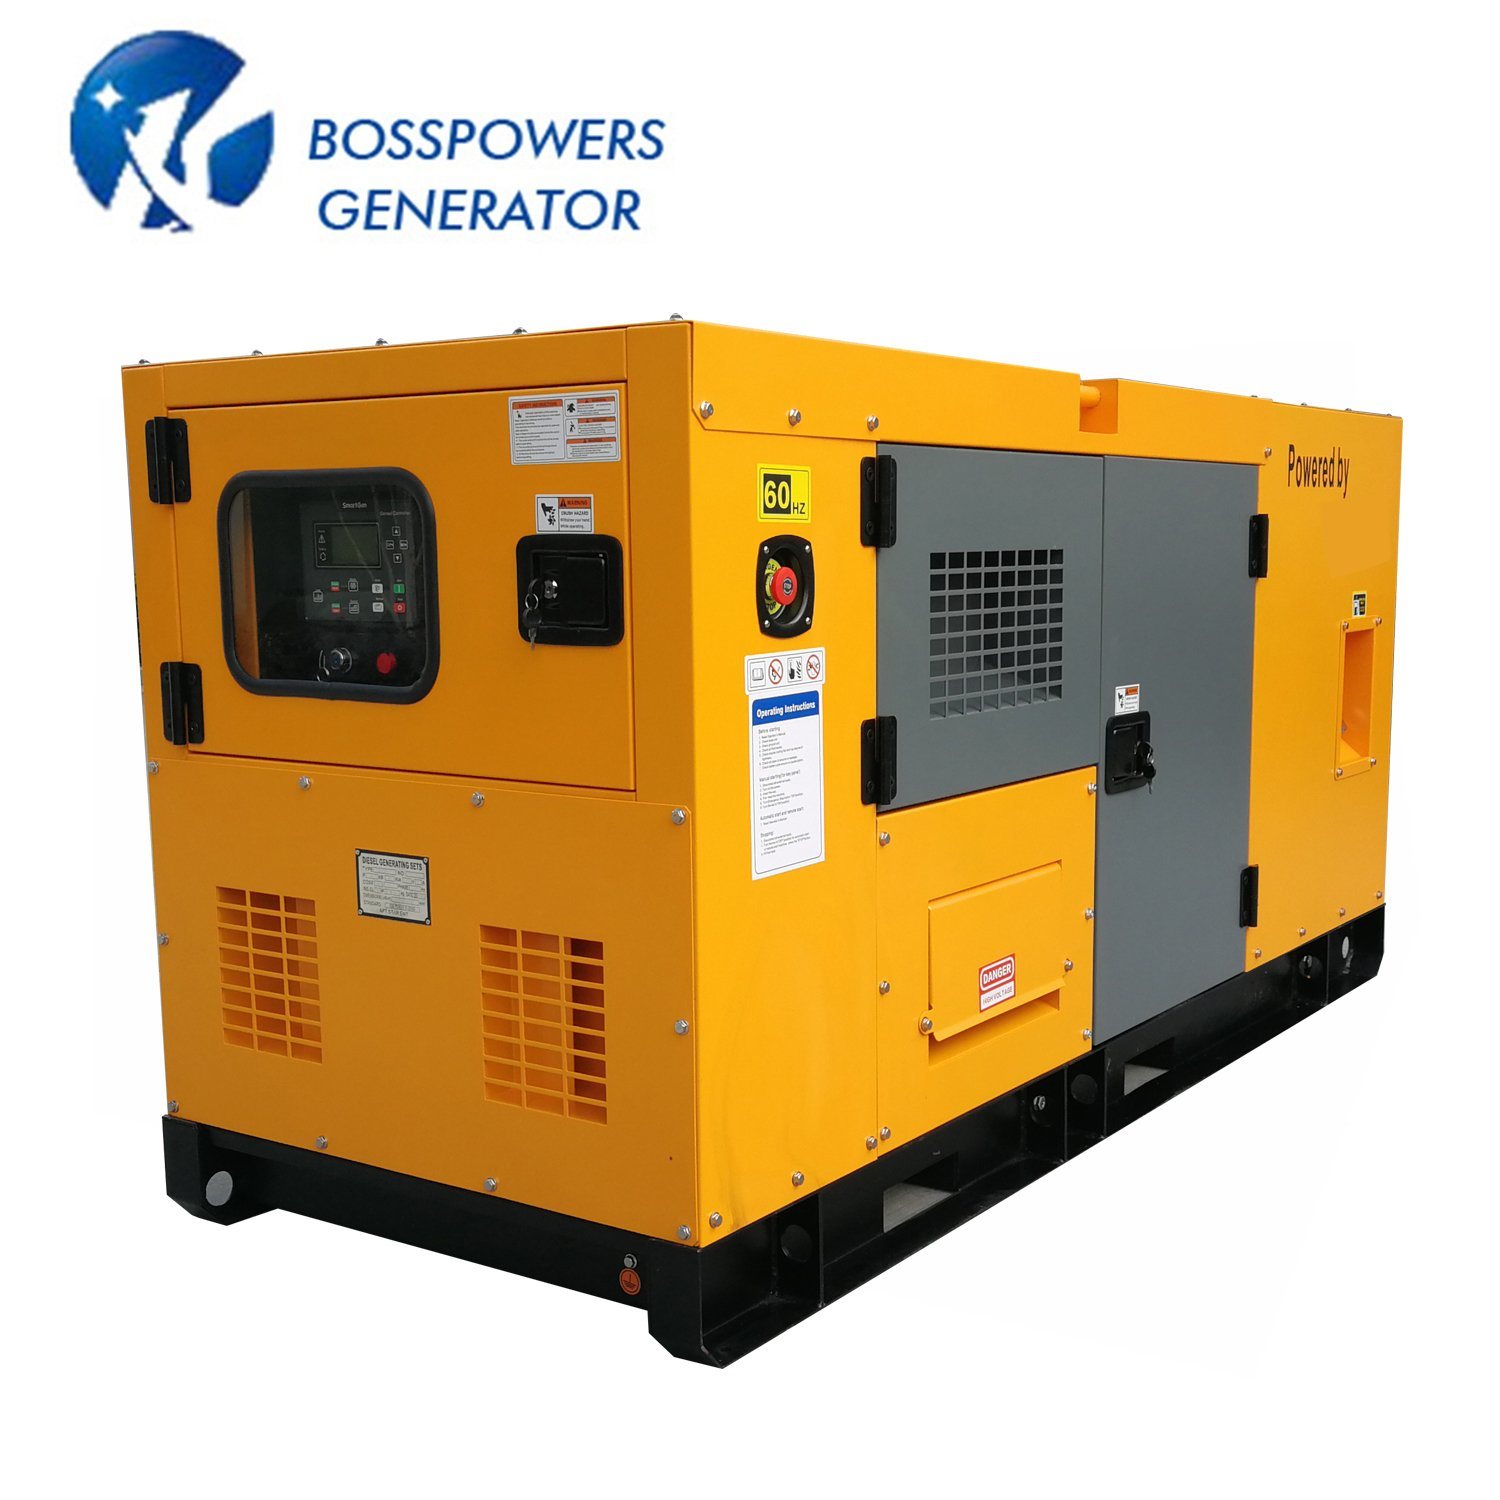 Factory Price Canopy FAW Xichai Engine Diesel Generating Set